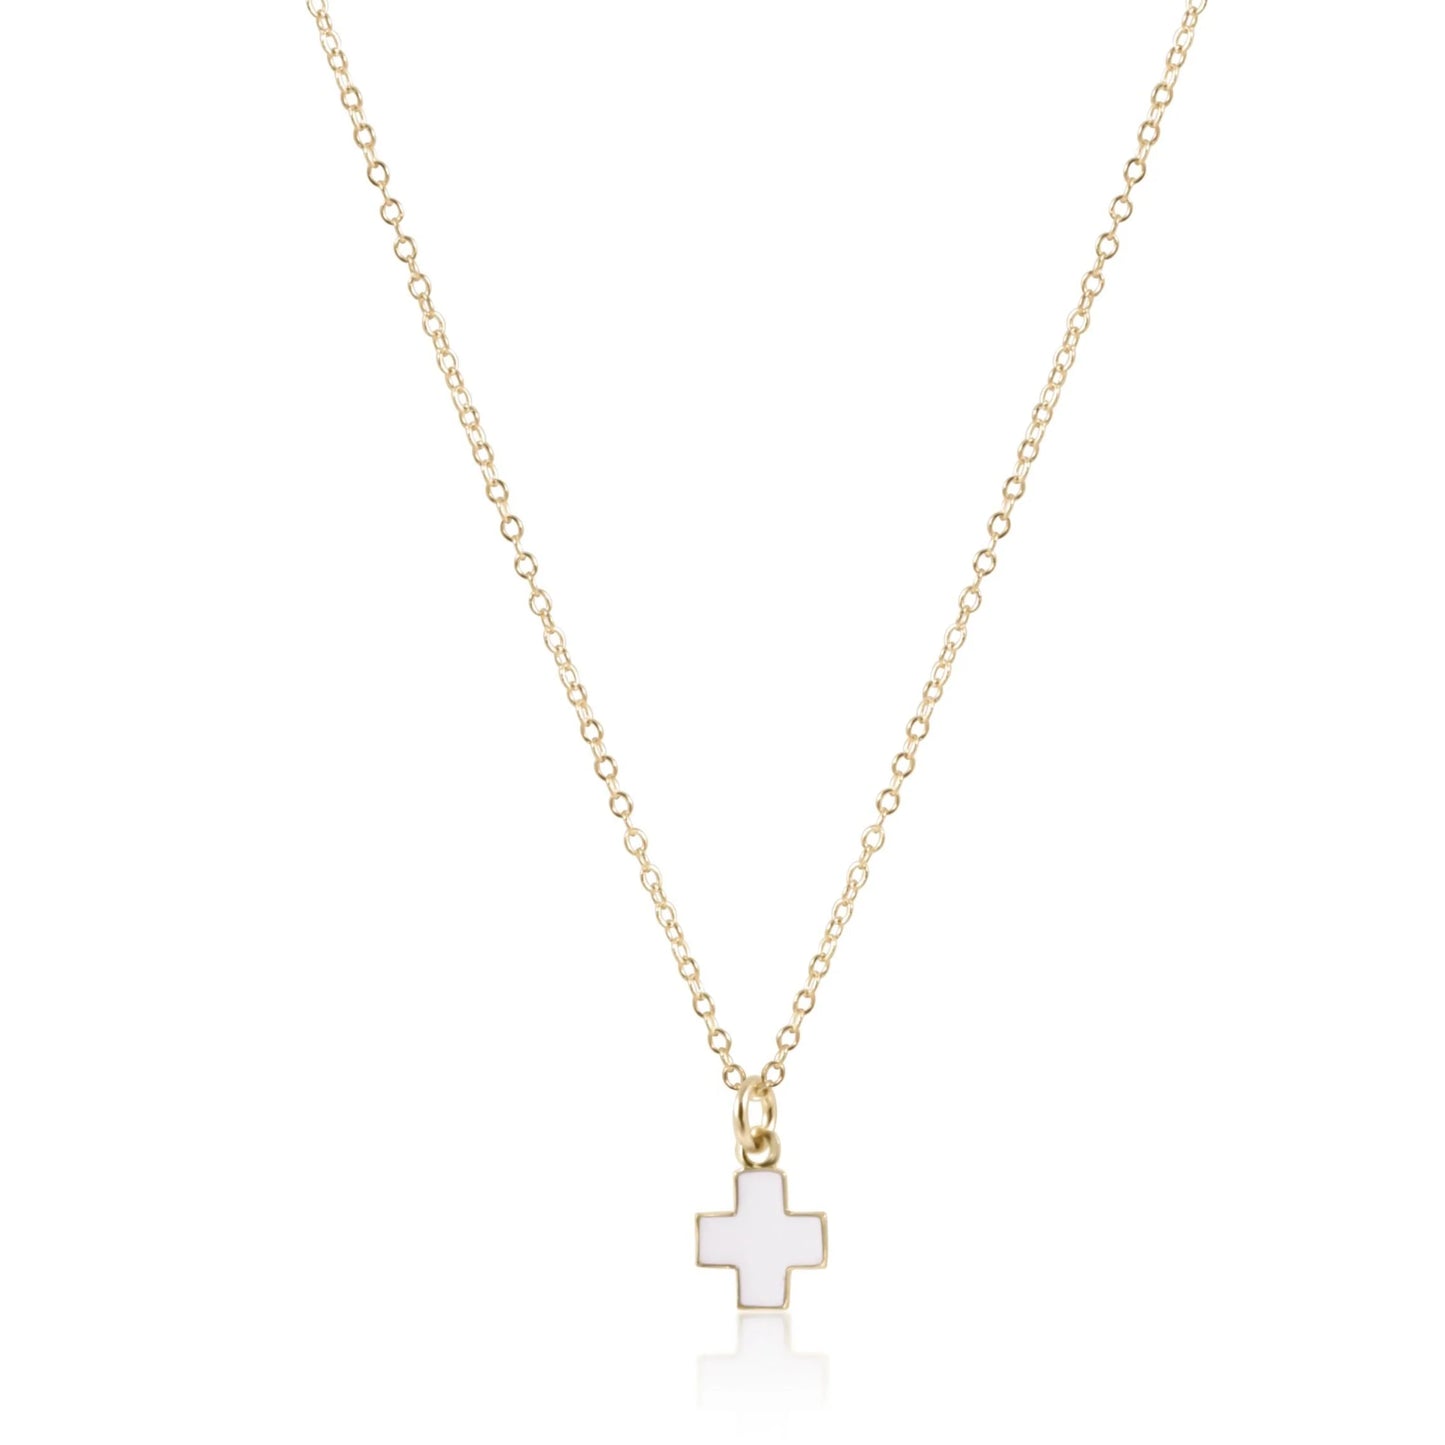 enewton 16" Necklace Gold - Signature Cross Gold Charm - Off-White